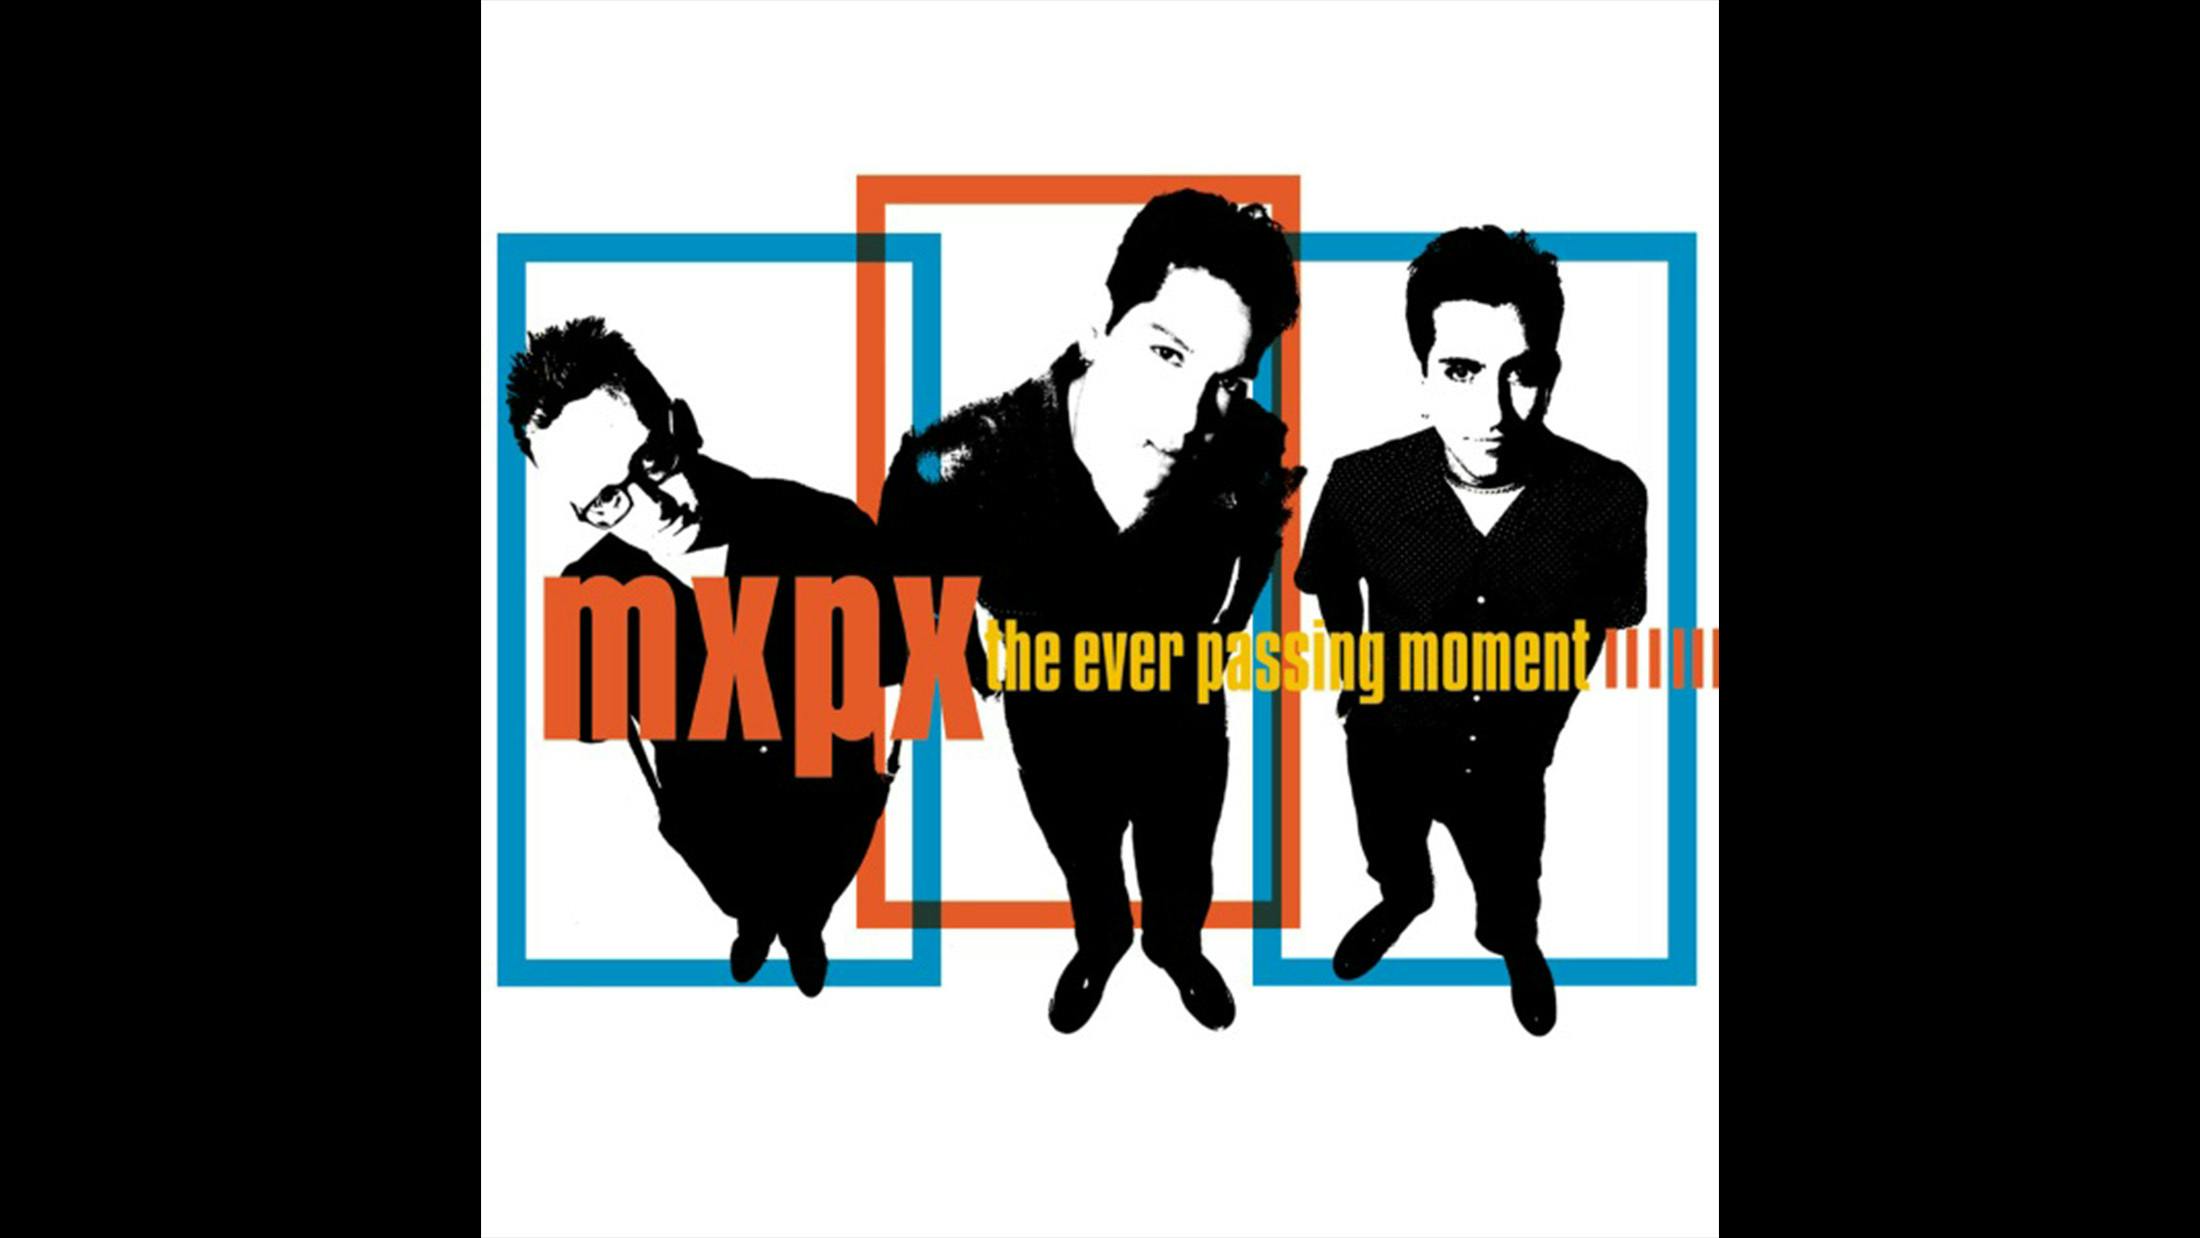 Fuelled by Mike Herrera’s irrepressible vocals and some neck-snapping turns of pace, this was the moment that MxPx set their stall out as a force to be reckoned with. Fans of blink-182 and Green Day need only check out the fizzing power-chords of Responsibility to fall for this under-the-radar classic.